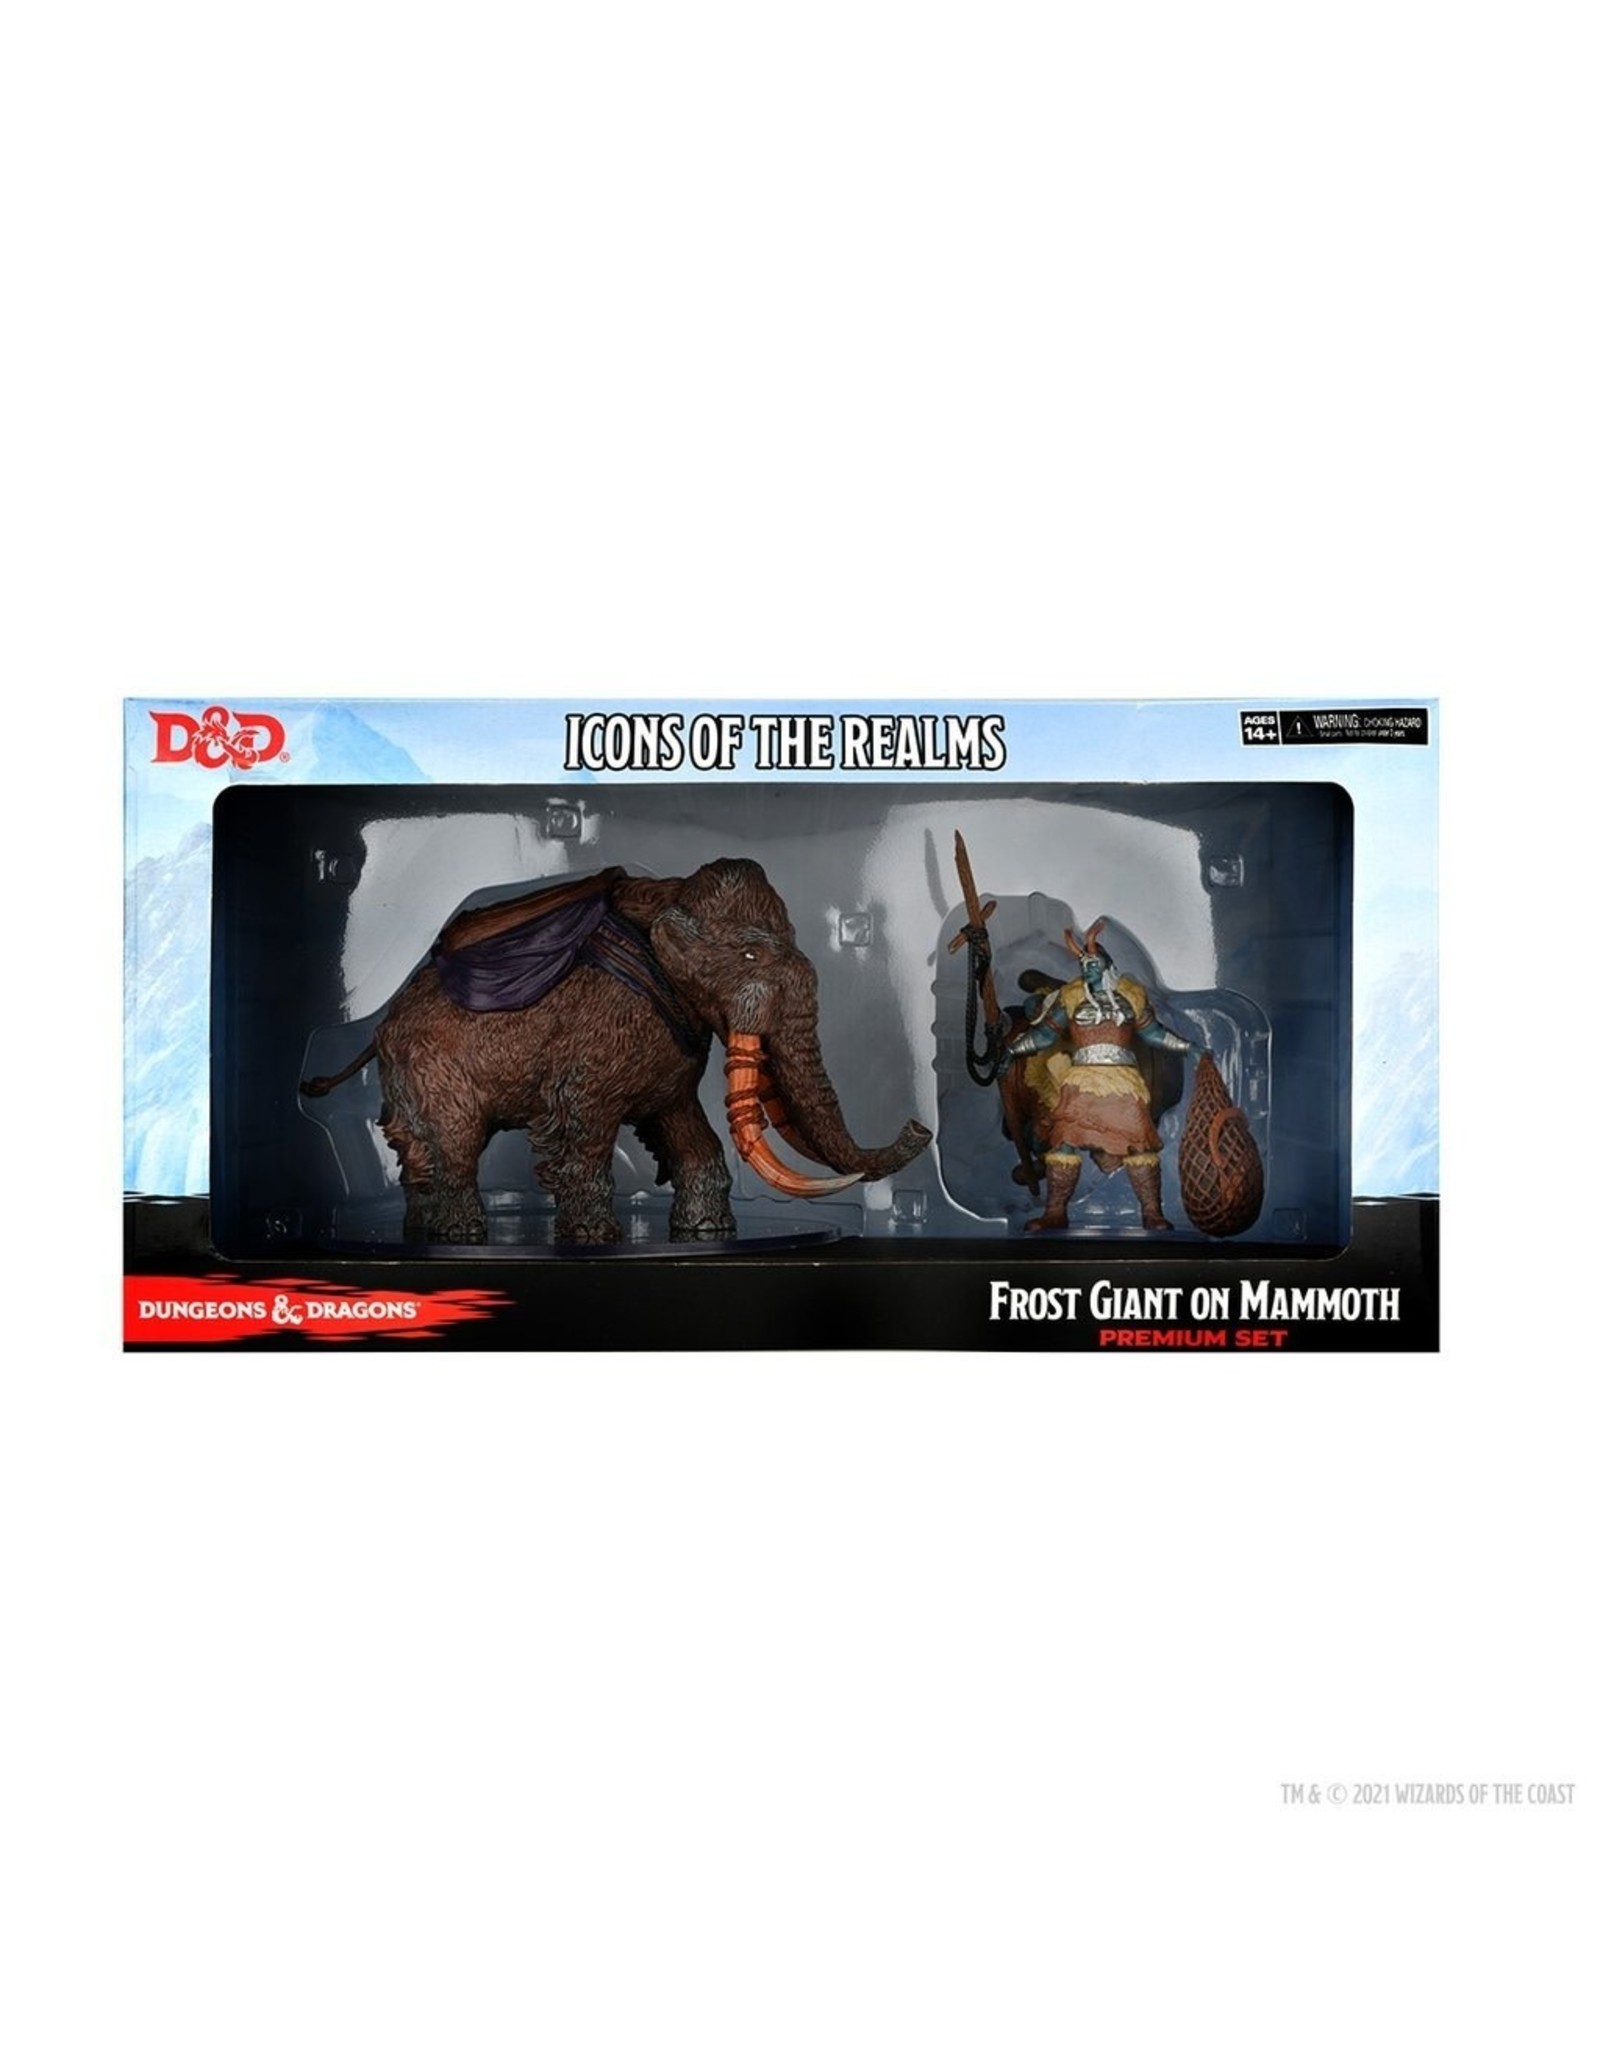 Dungeons & Dragons Frost giant mammoth - Premium set